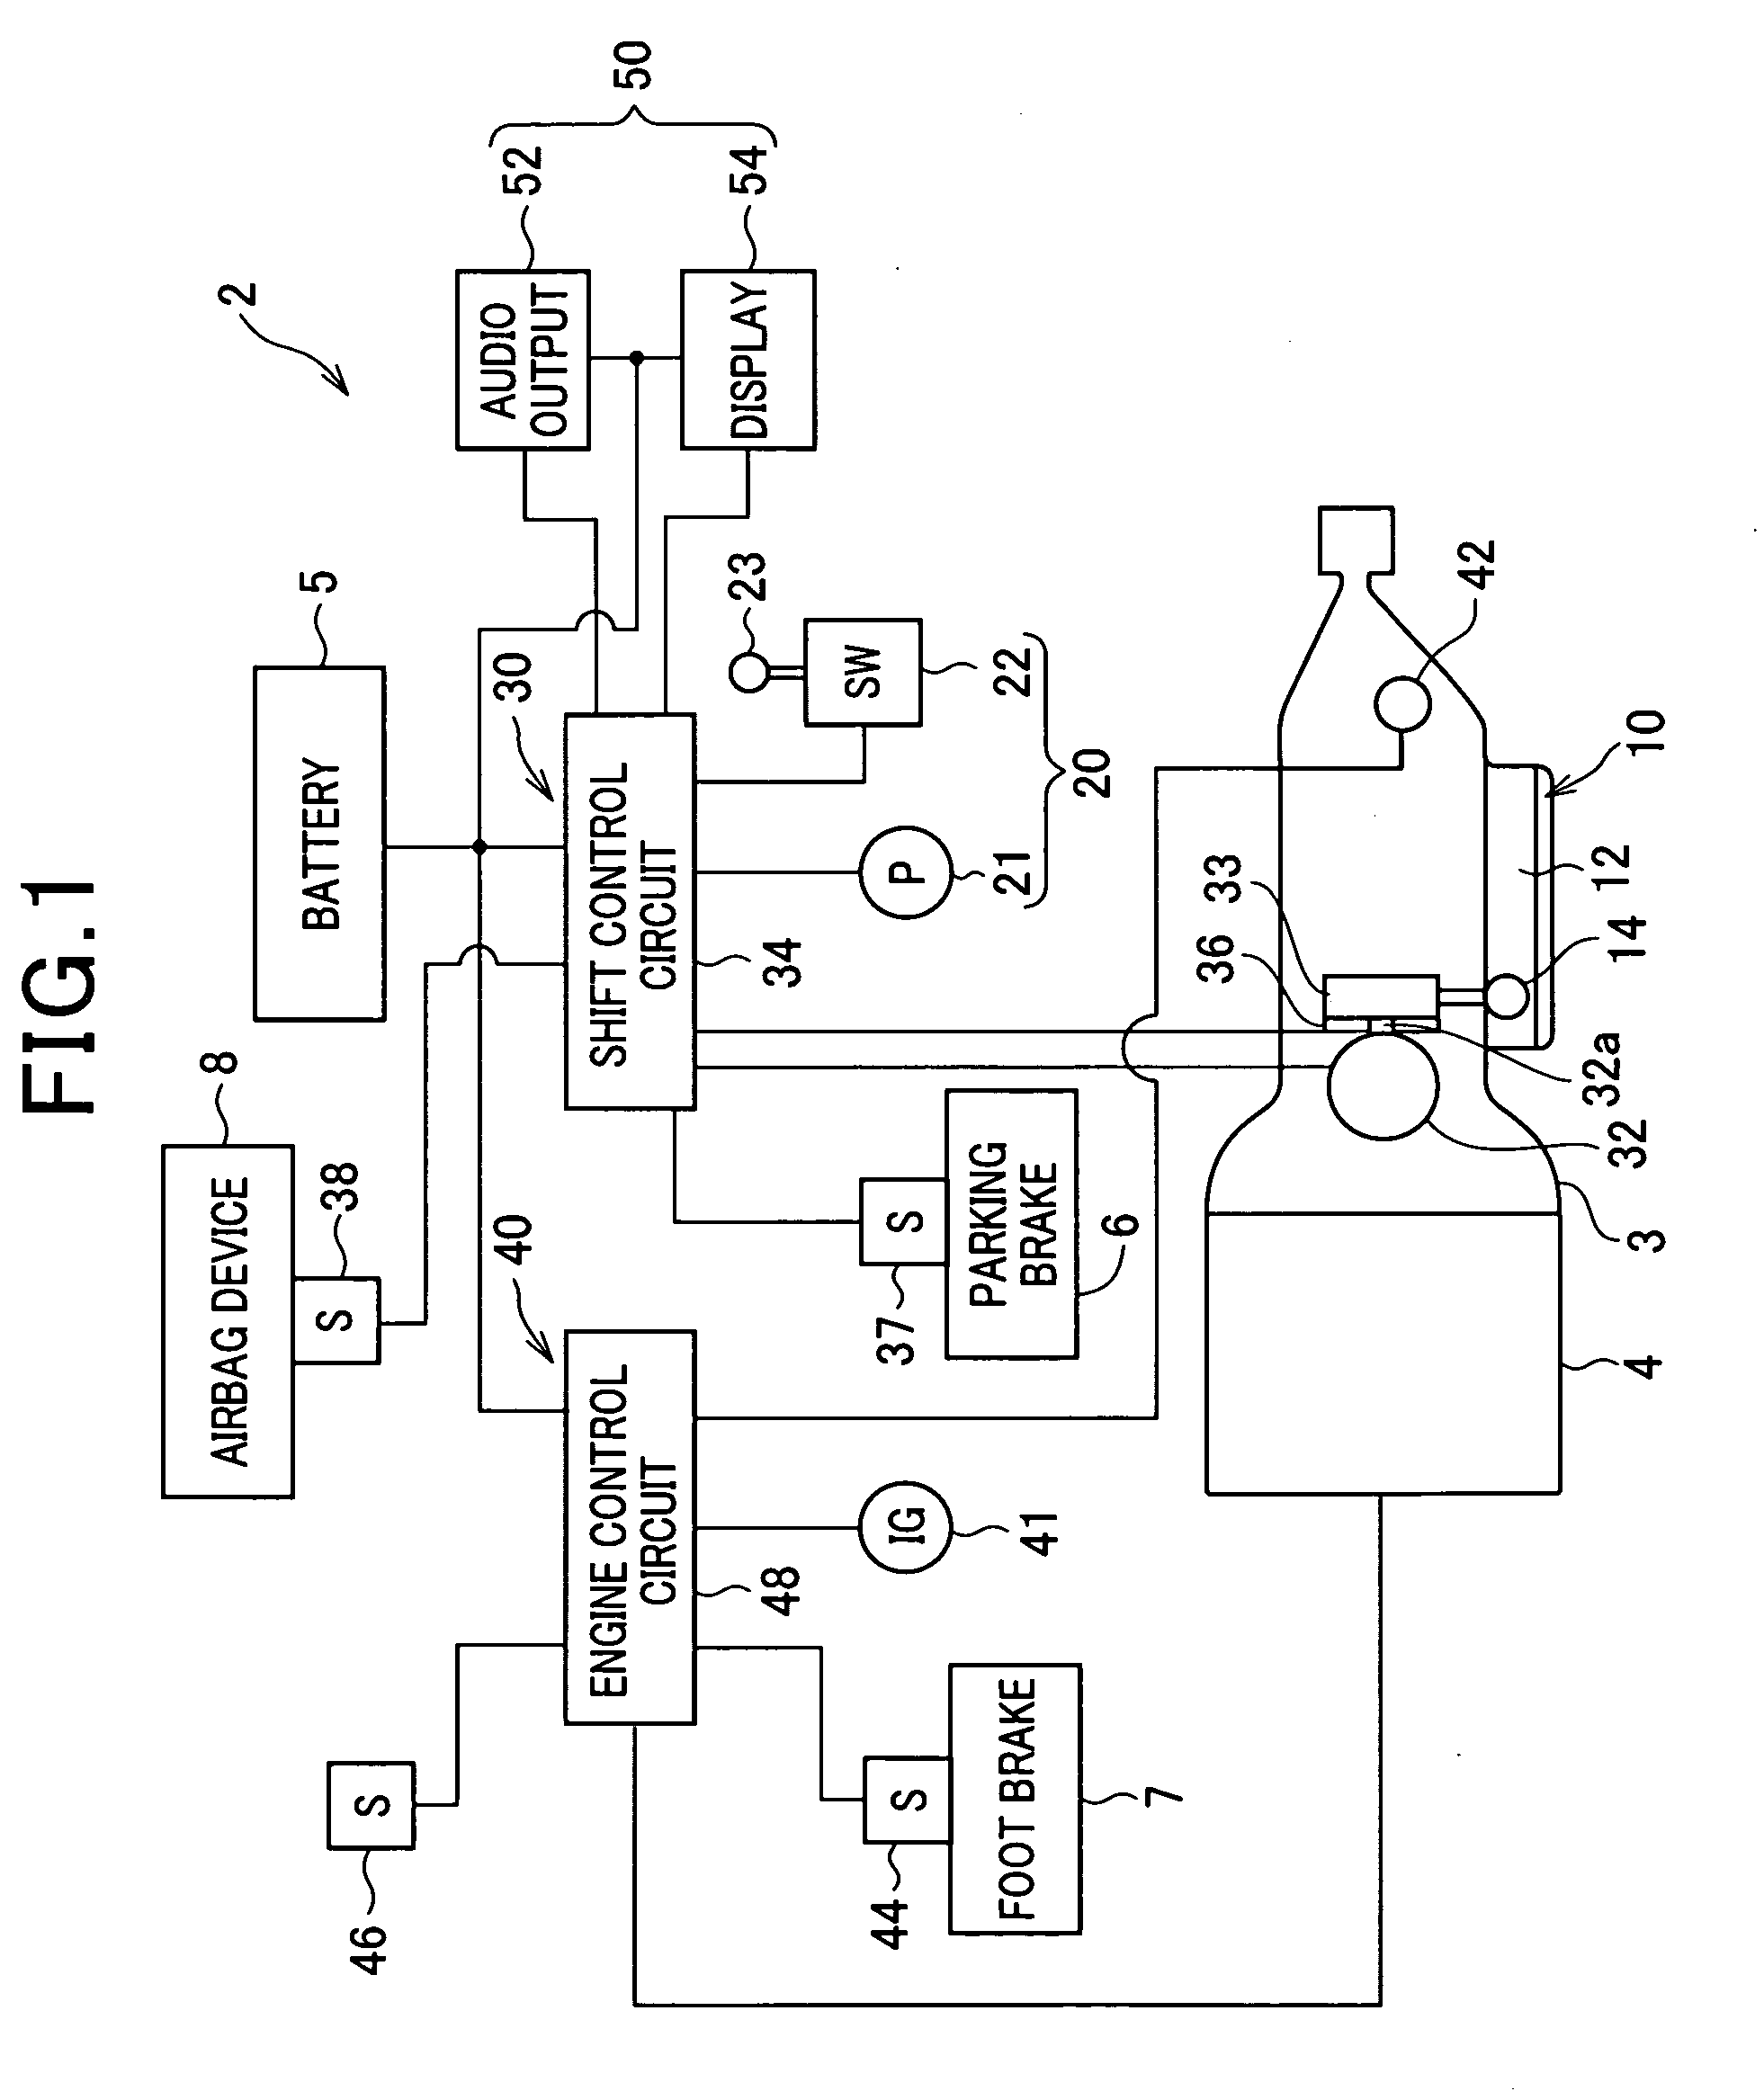 Shift-by-wire control system for vehicle automatic transmission